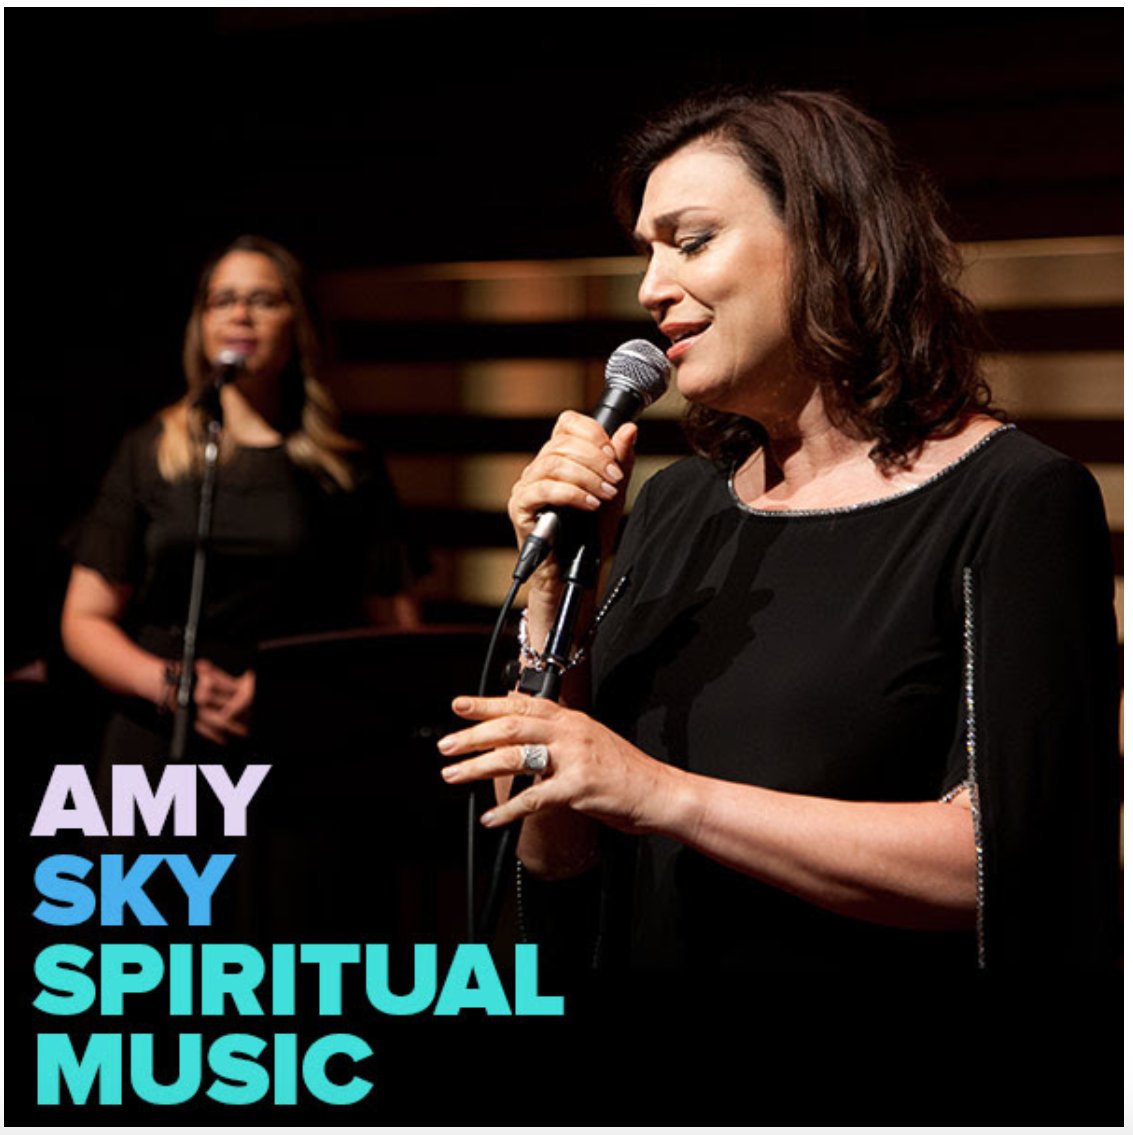 Amy Sky has recorded her first collaborative album with husband Marc Jordan. He Sang She Sang is a collection of duets intersecting at the place where their ‘voices and genres’ meet. Amy has a spiritual side too, which she showcased at #ideacity. bit.ly/3driSUE